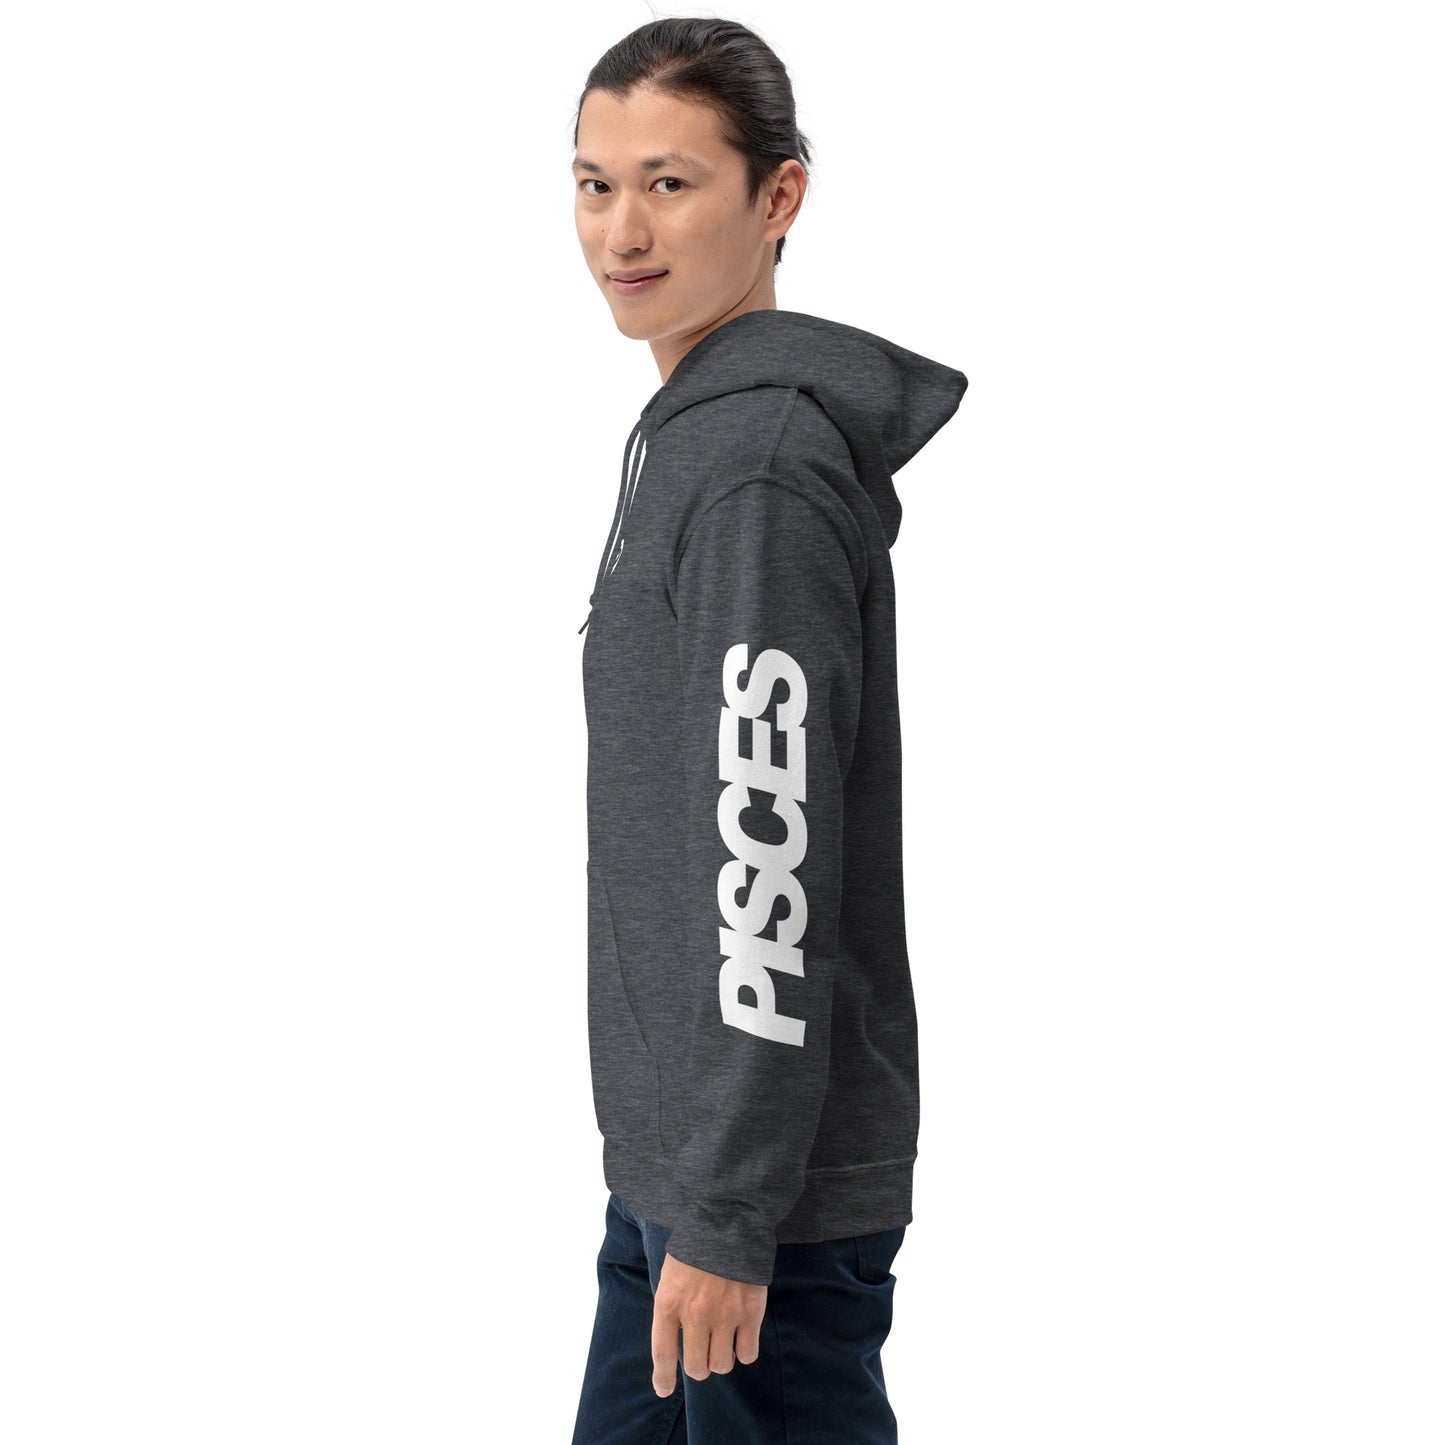 Cancer & Pisces - Unisex Couple Hoodie